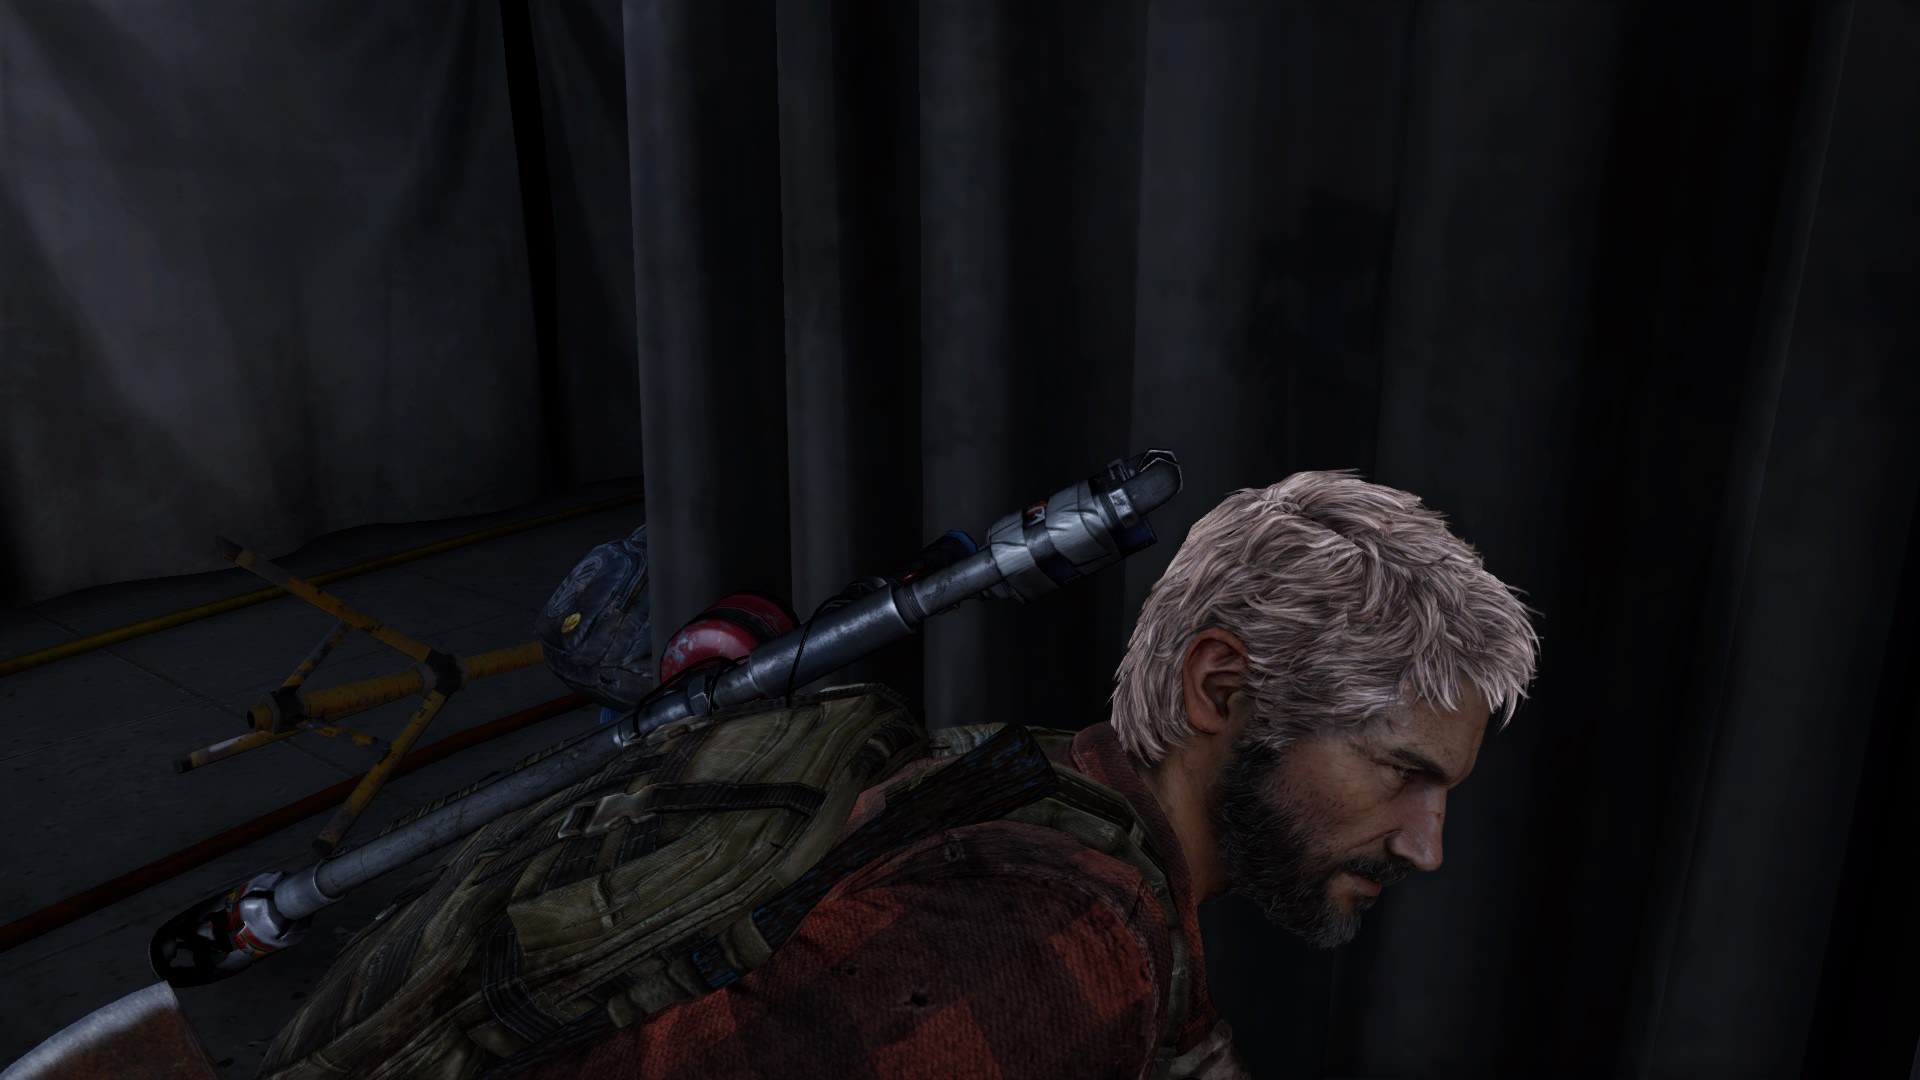 Got a glimpse of Joel in TLoU 2 in the science building